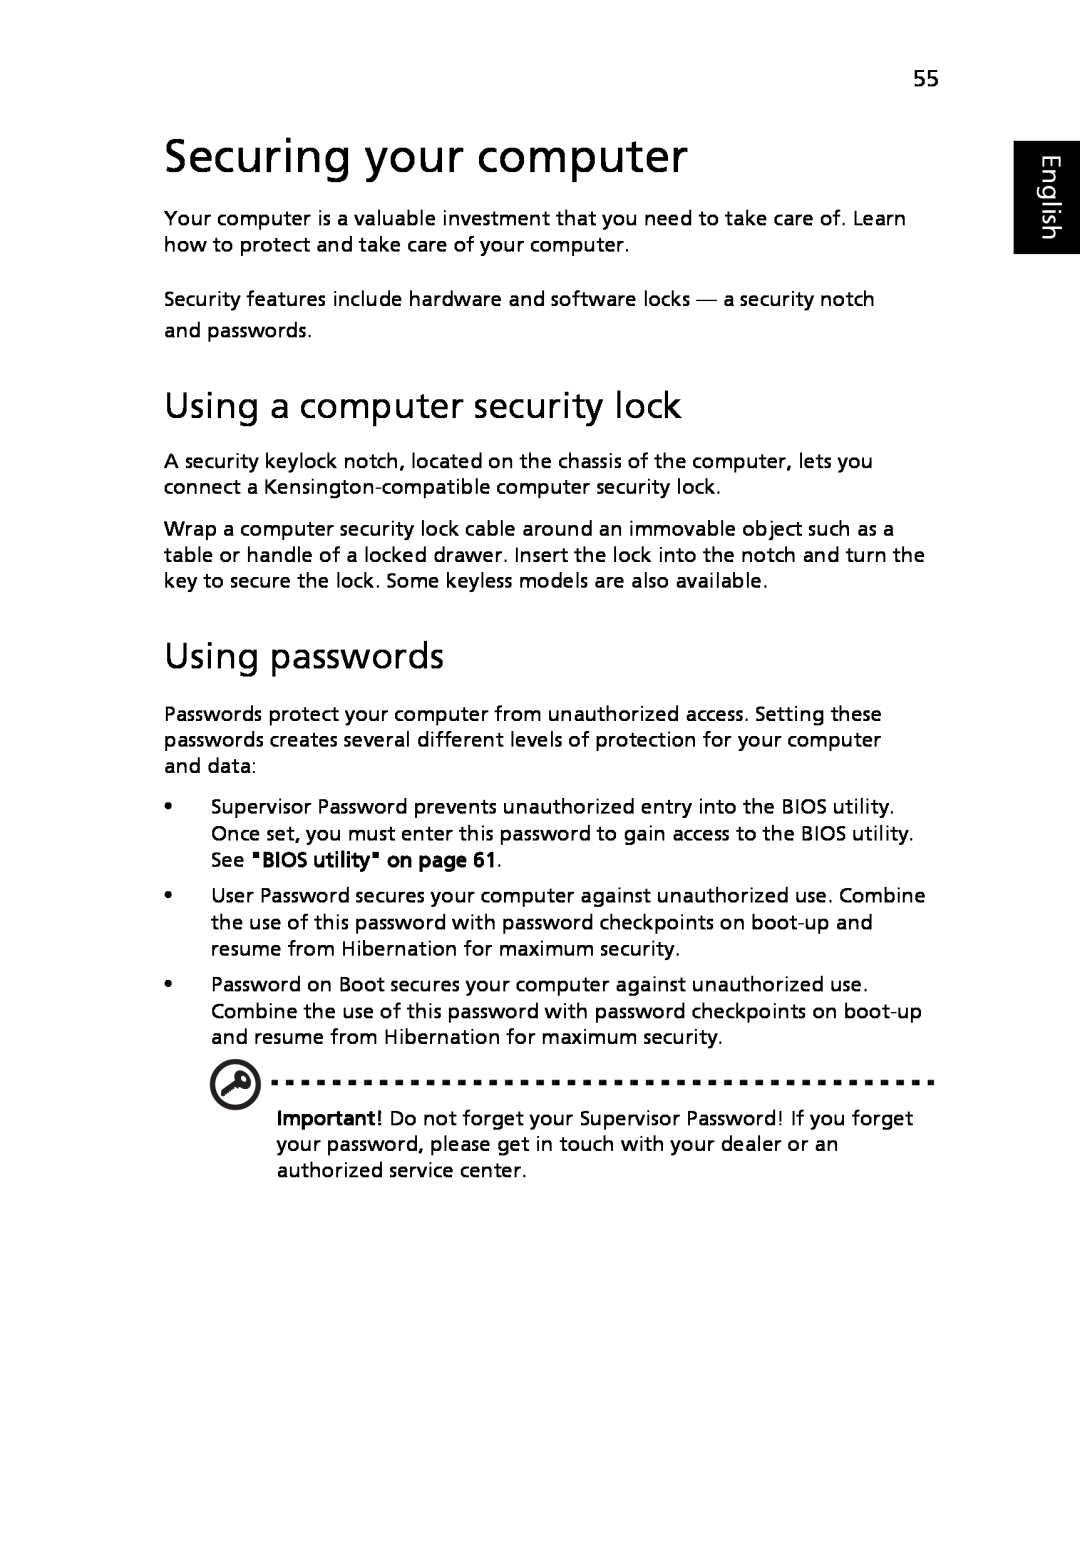 Acer 3040 Series, 3030 Series manual Securing your computer, Using a computer security lock, Using passwords, English 